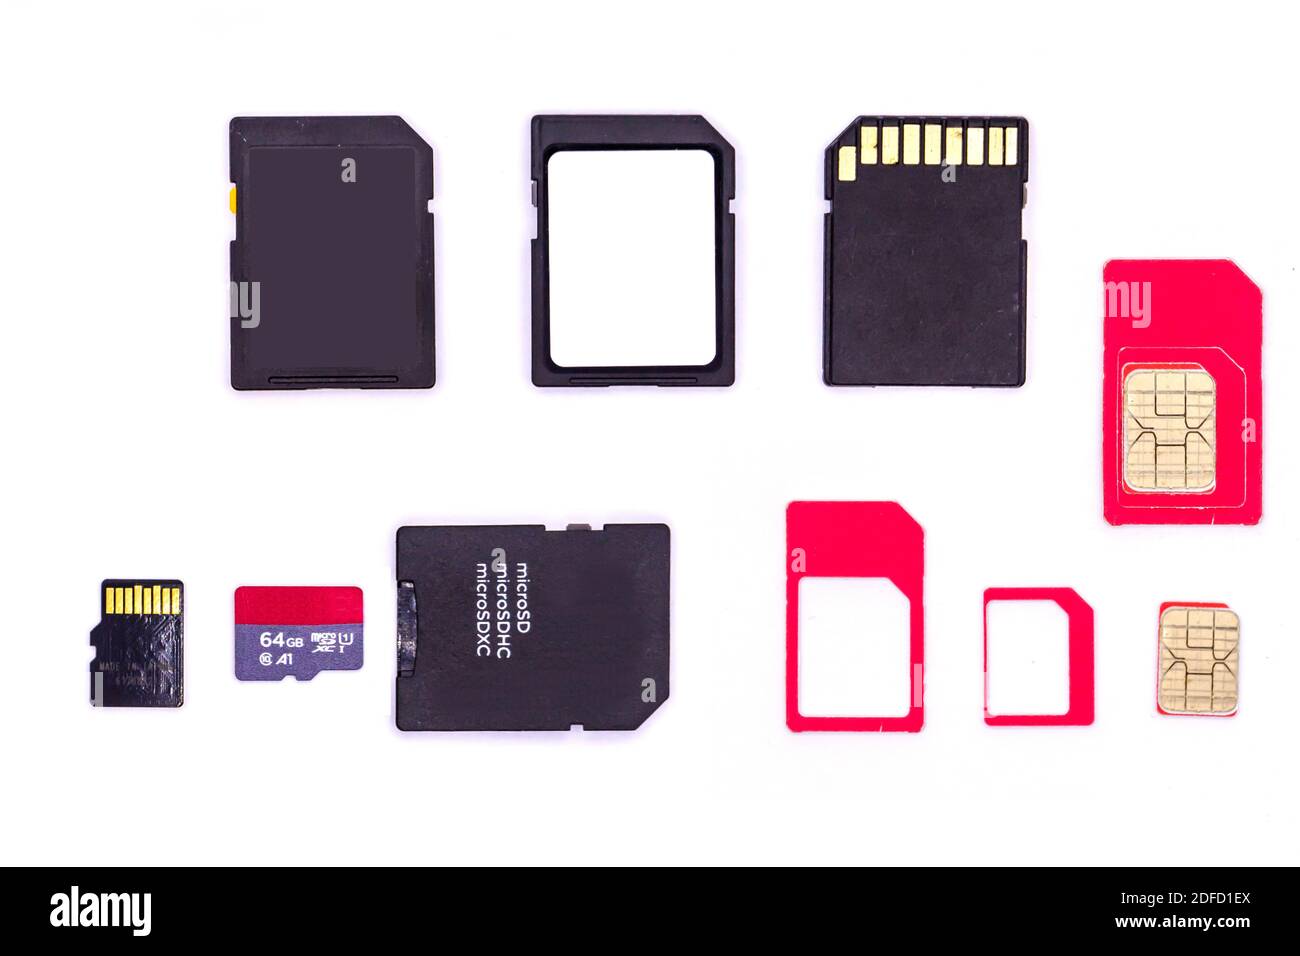 https://c8.alamy.com/comp/2DFD1EX/memory-and-sim-cards-various-sizes-sd-and-sim-cards-with-card-holder-isolated-on-white-background-sd-and-micro-sd-cards-micro-mini-and-nano-sim-c-2DFD1EX.jpg